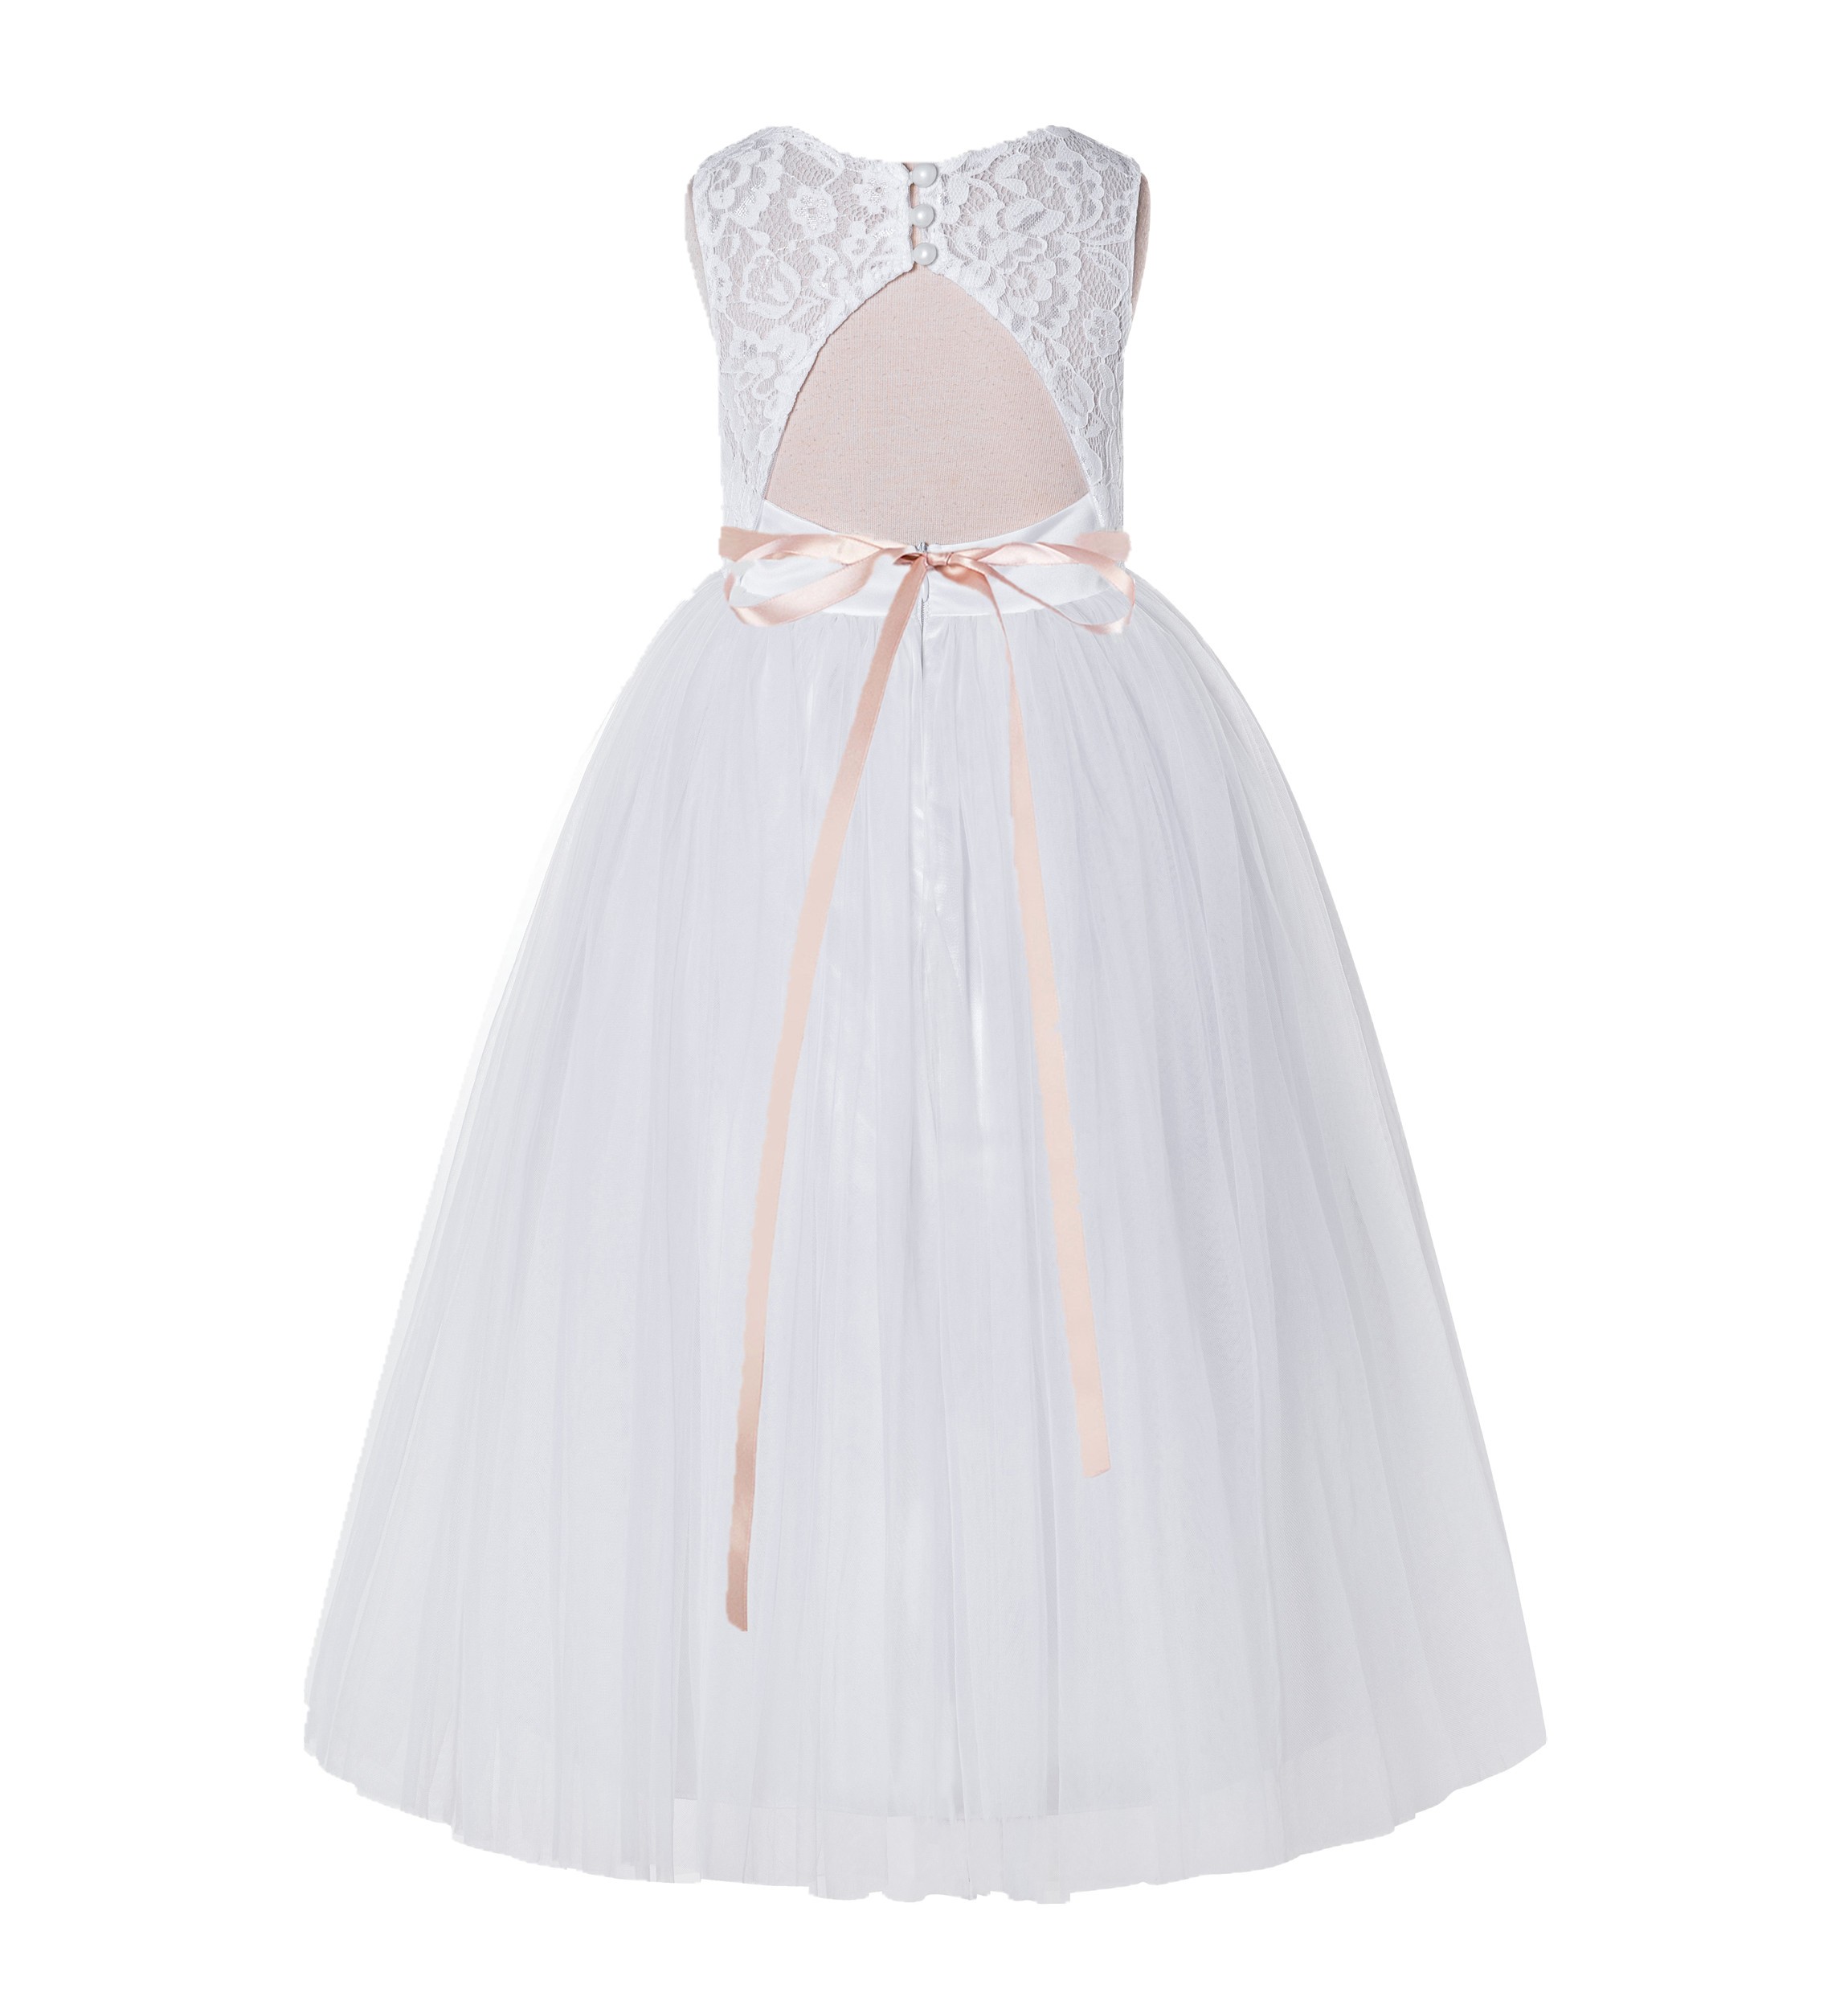 White / Blush Pink A-Line Tulle Lace Flower Girl Dress 178R4